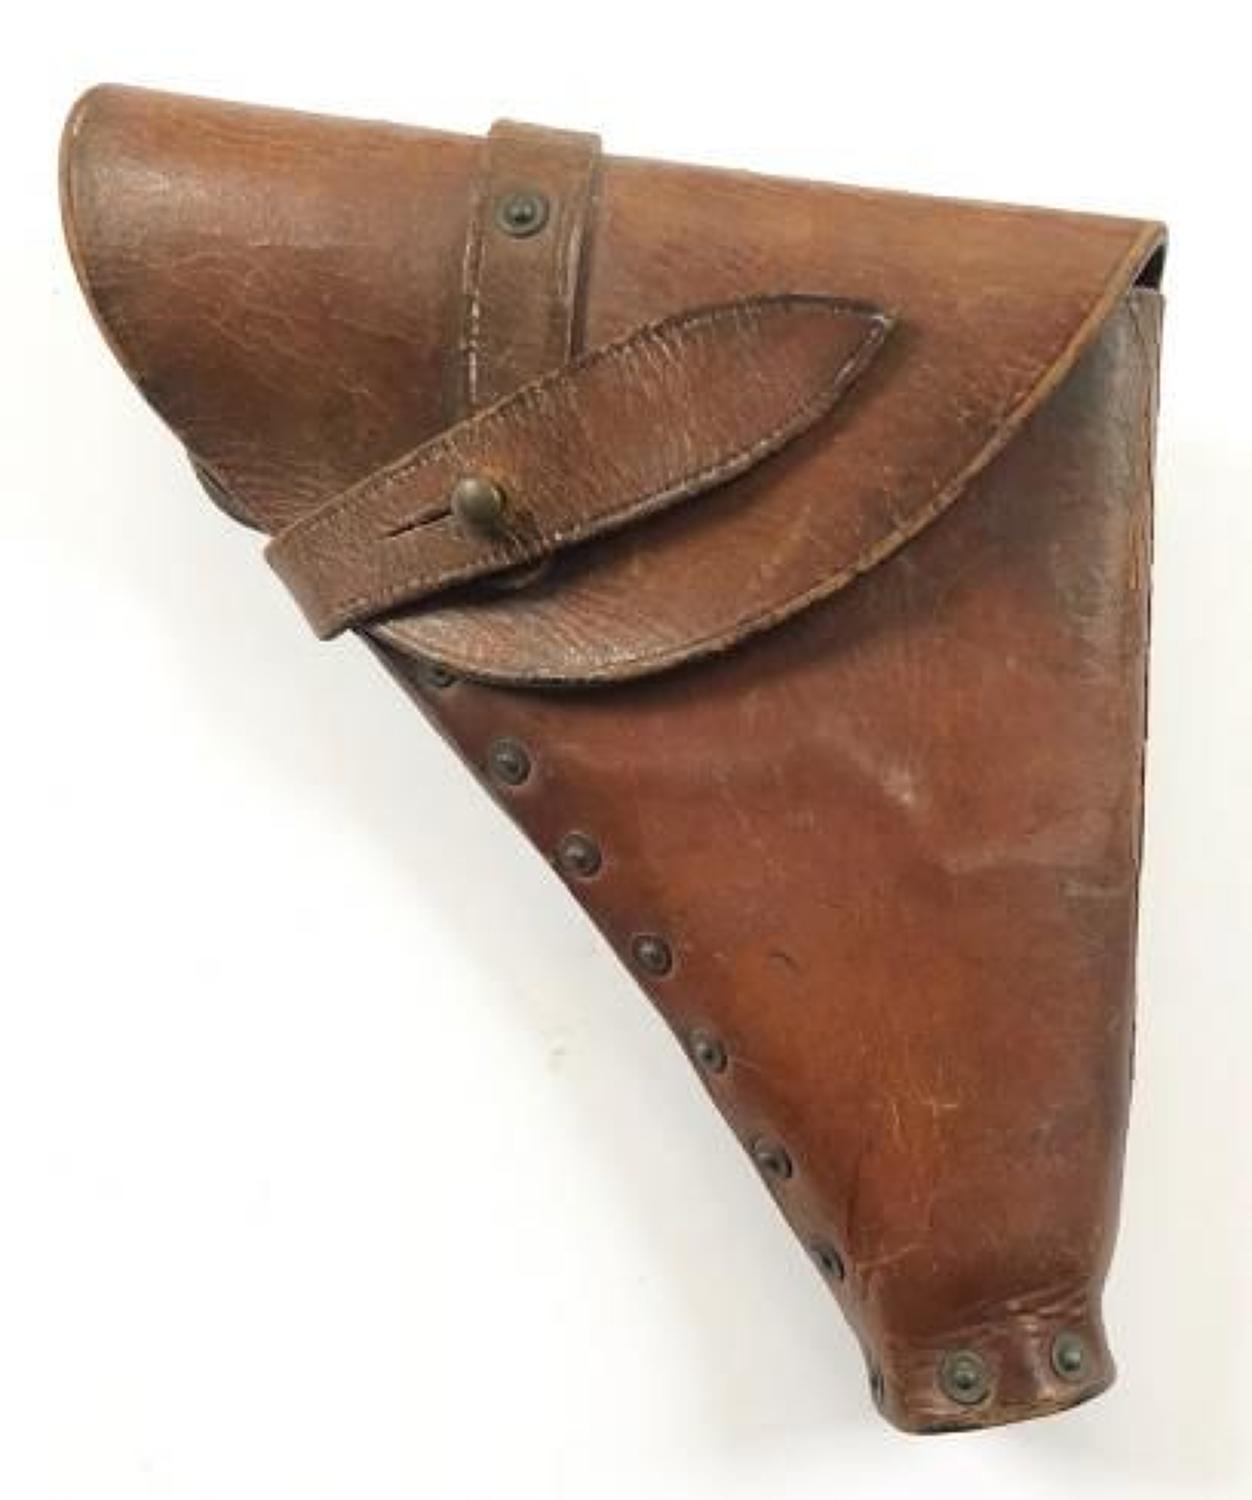 Victorian Boer War Period Royal Navy Leather Pistol Holster.